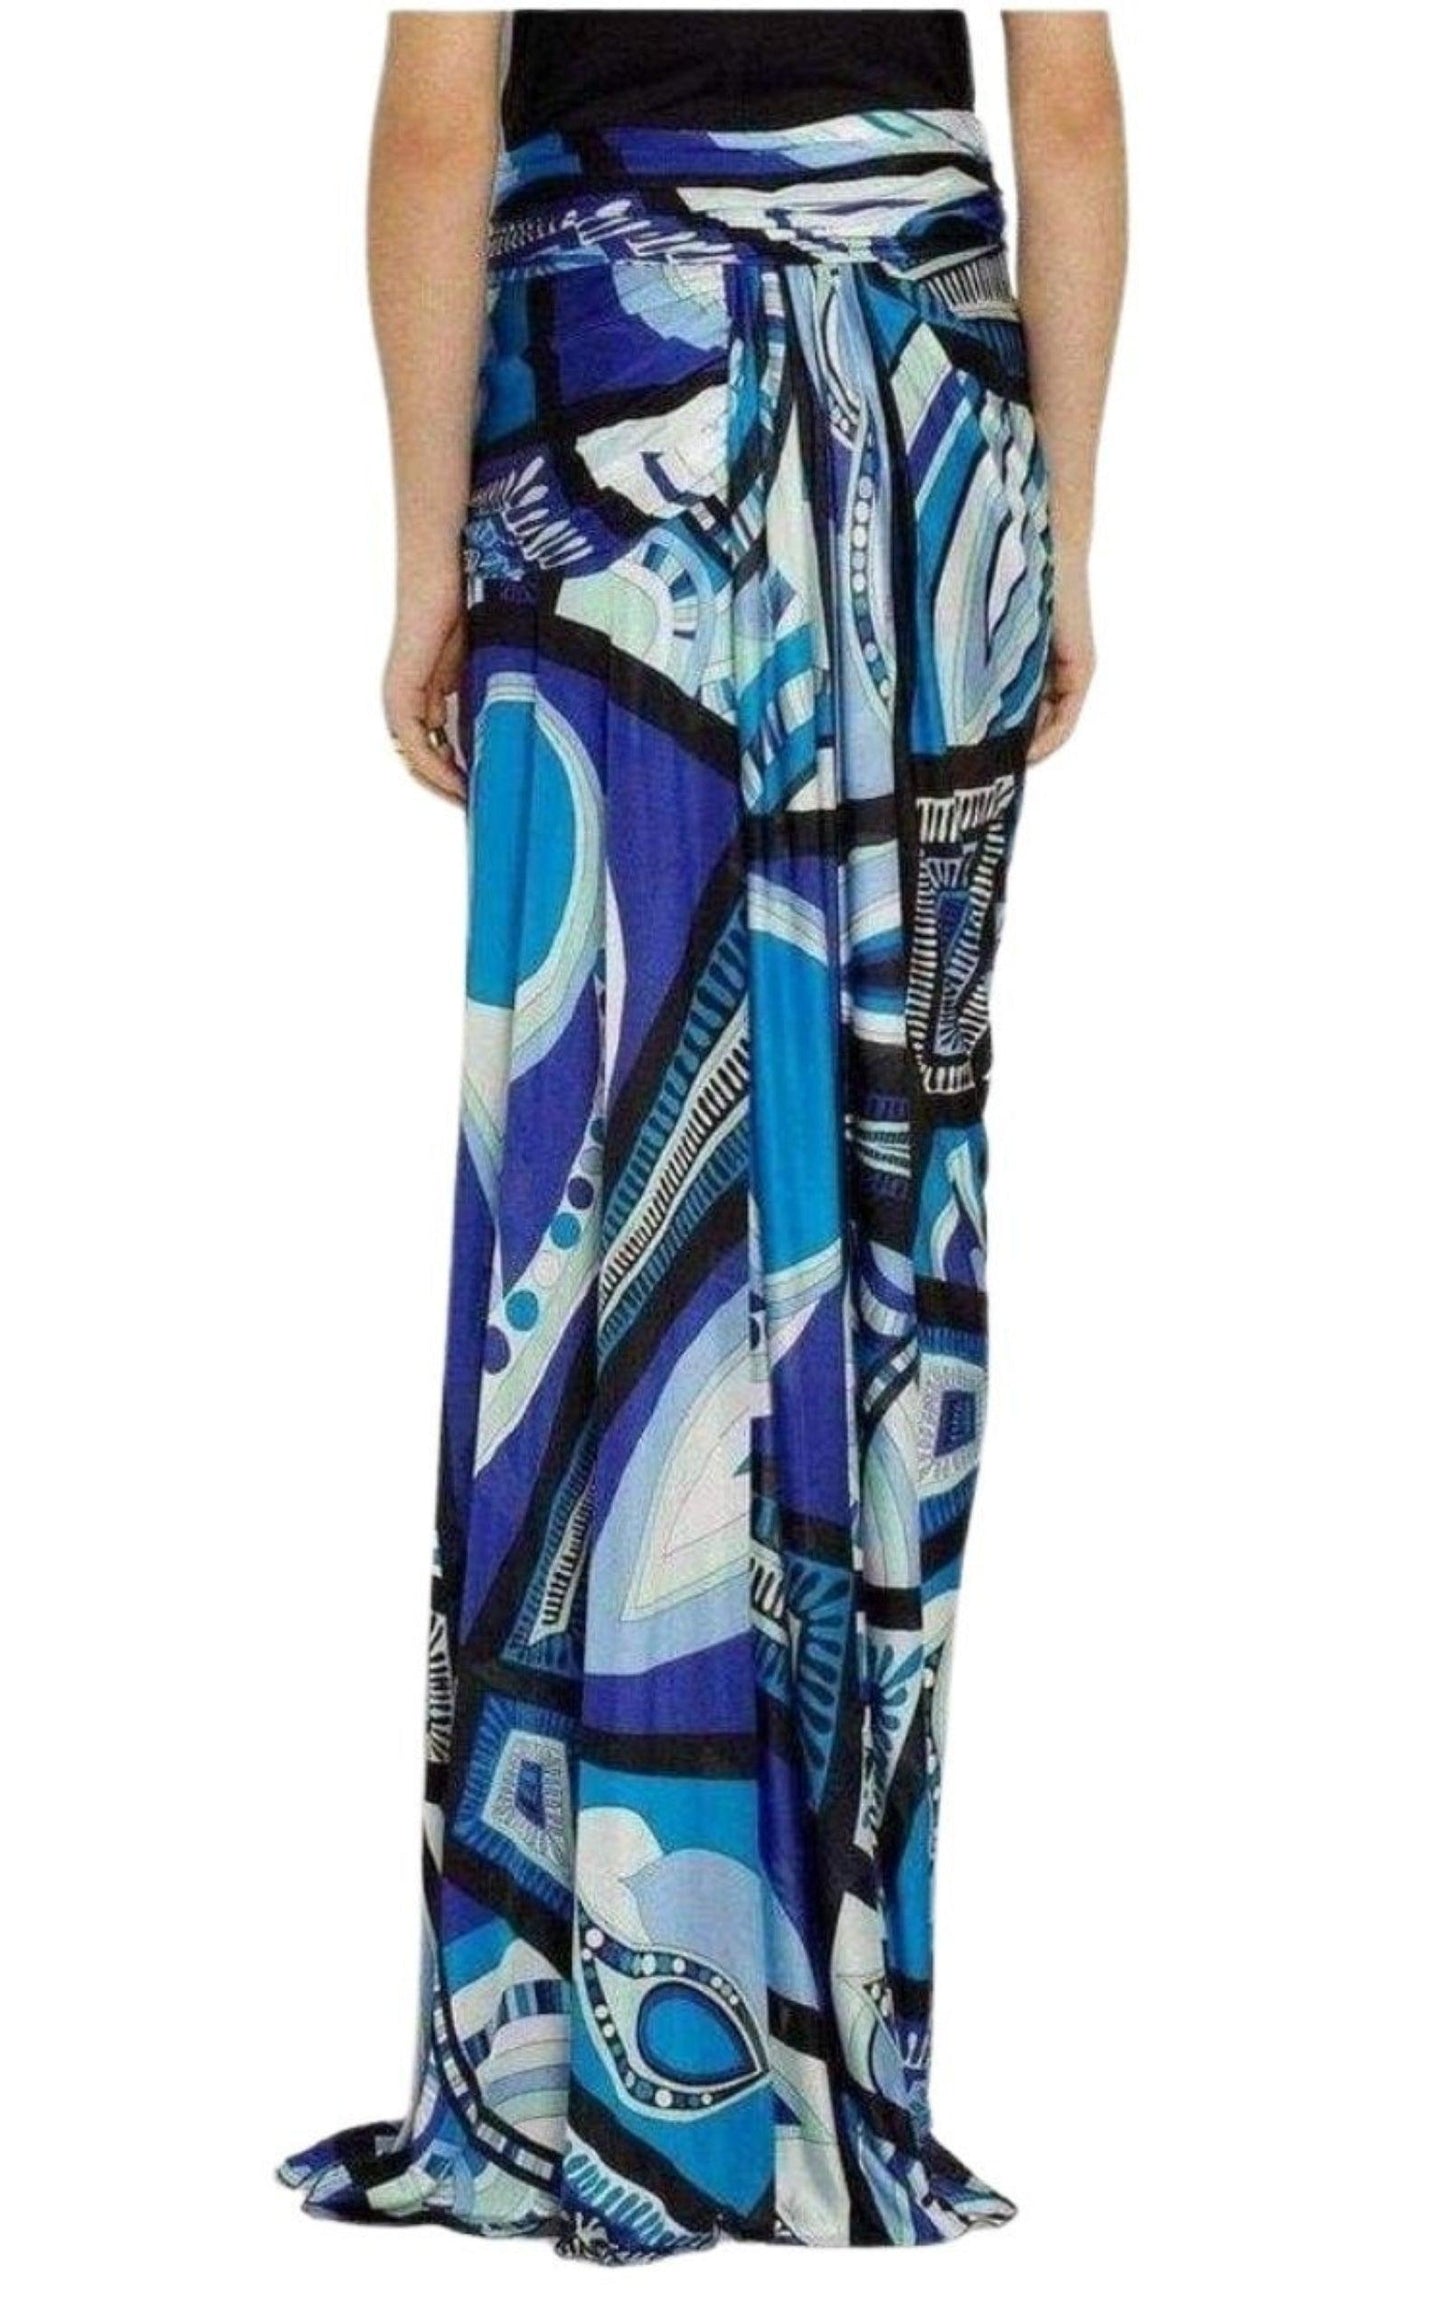  Emilio PucciPrinted Stretch Jersey Skirt - Runway Catalog